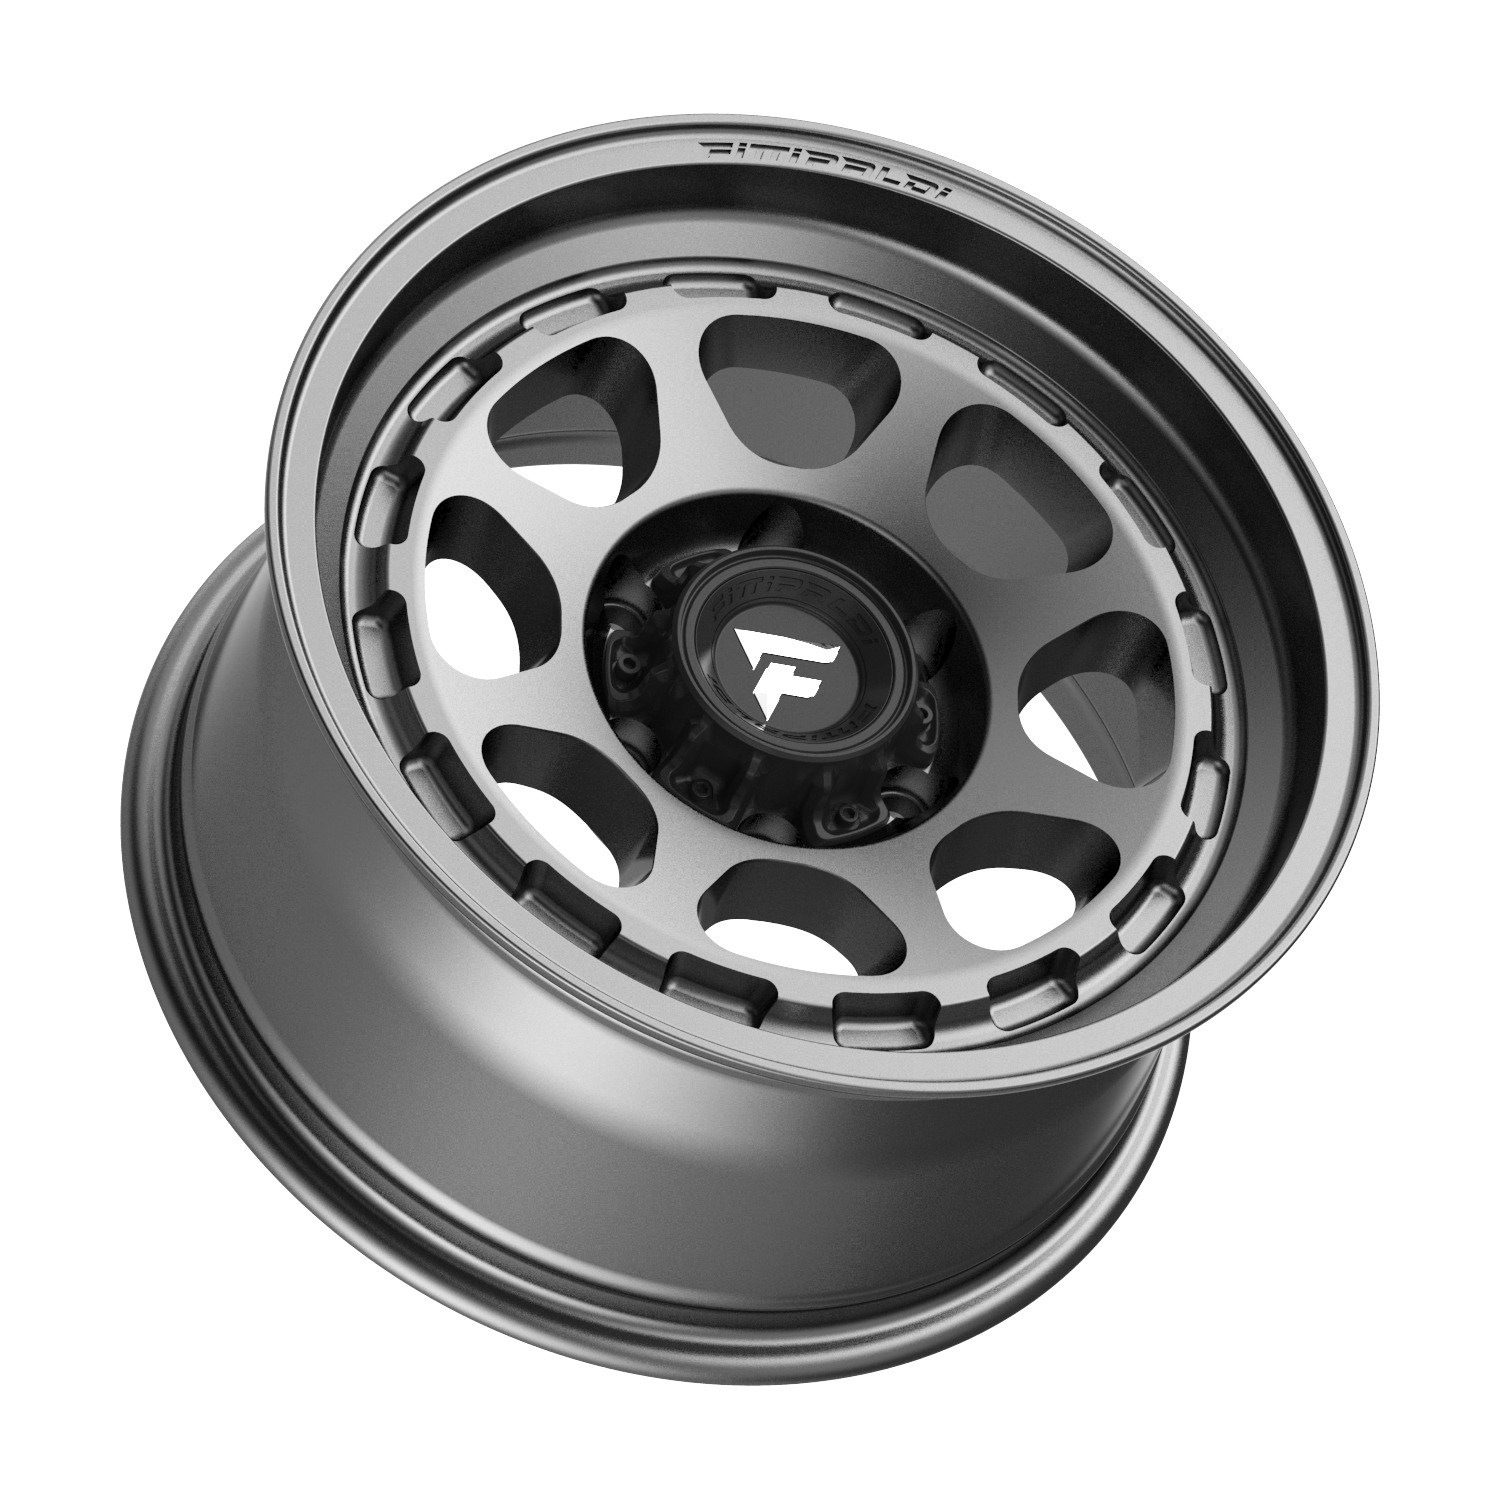 FITTIPALDI OFFROAD FT103A 17X8.5, PCD 6X5.50, ET +00, CB 106.2-SATIN ANTHRACITE